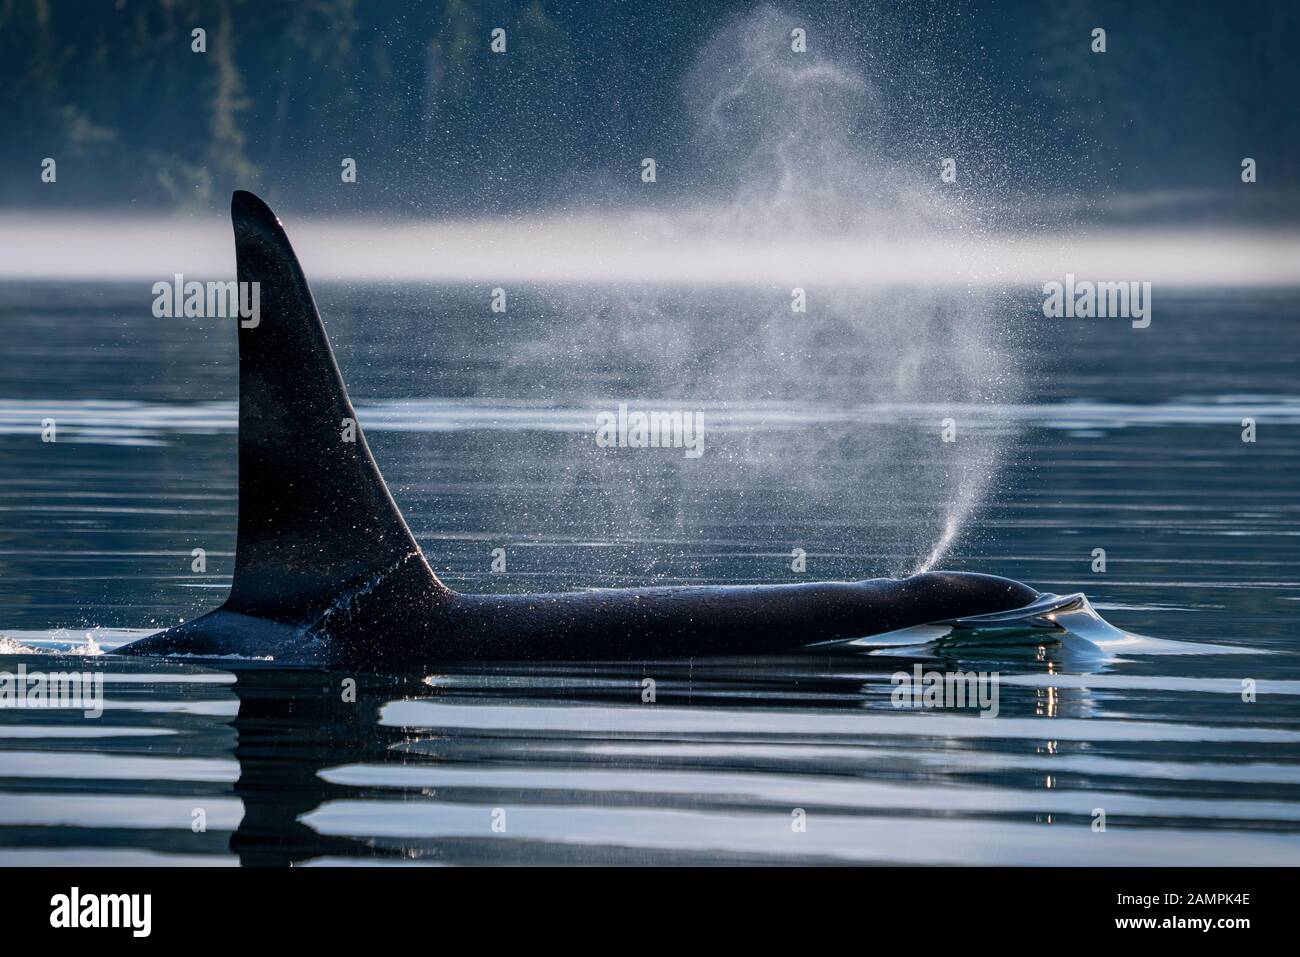 A66 - Surf - Family: A42's. Northern resident male killer whale (Orcinus orca), Johnstone Strait off Vancouver Island, British Columbia, Canada. Stock Photo